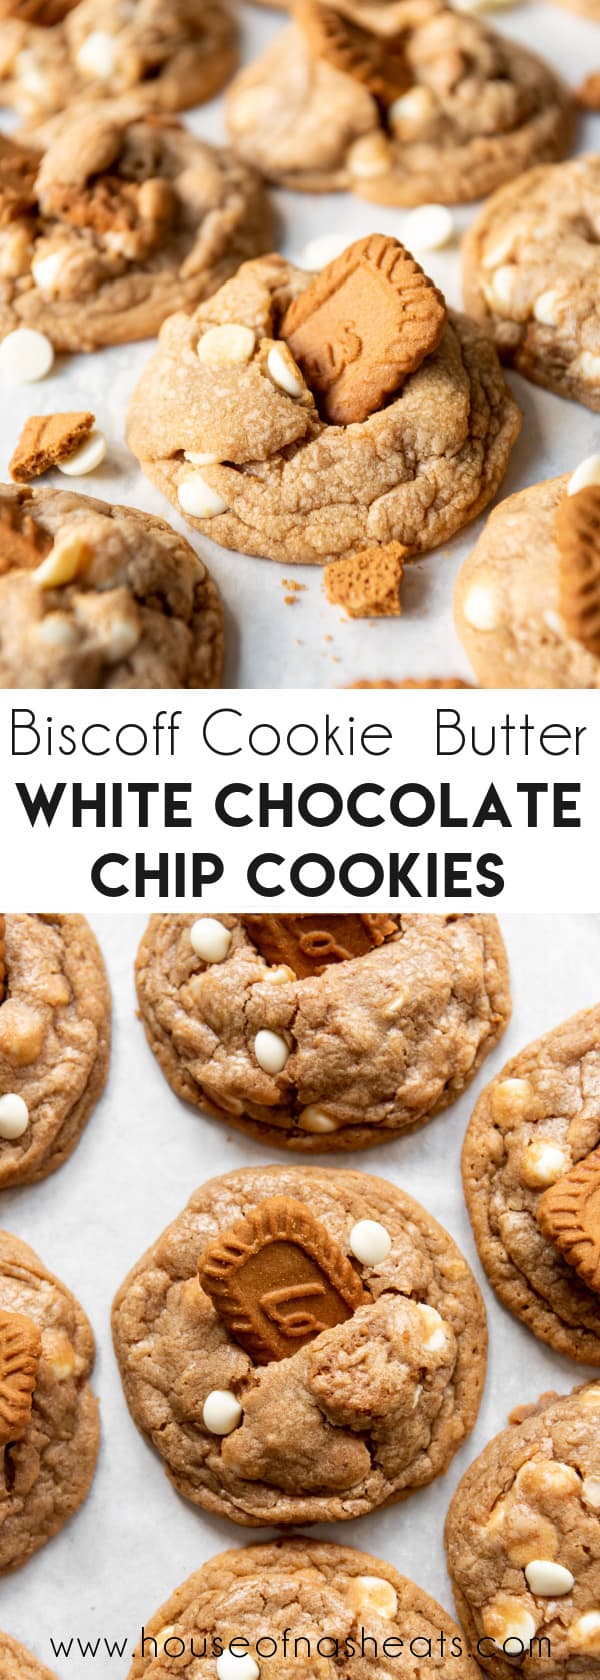 A collage of images of Biscoff cookie butter white chocolate chip cookies with text overlay.